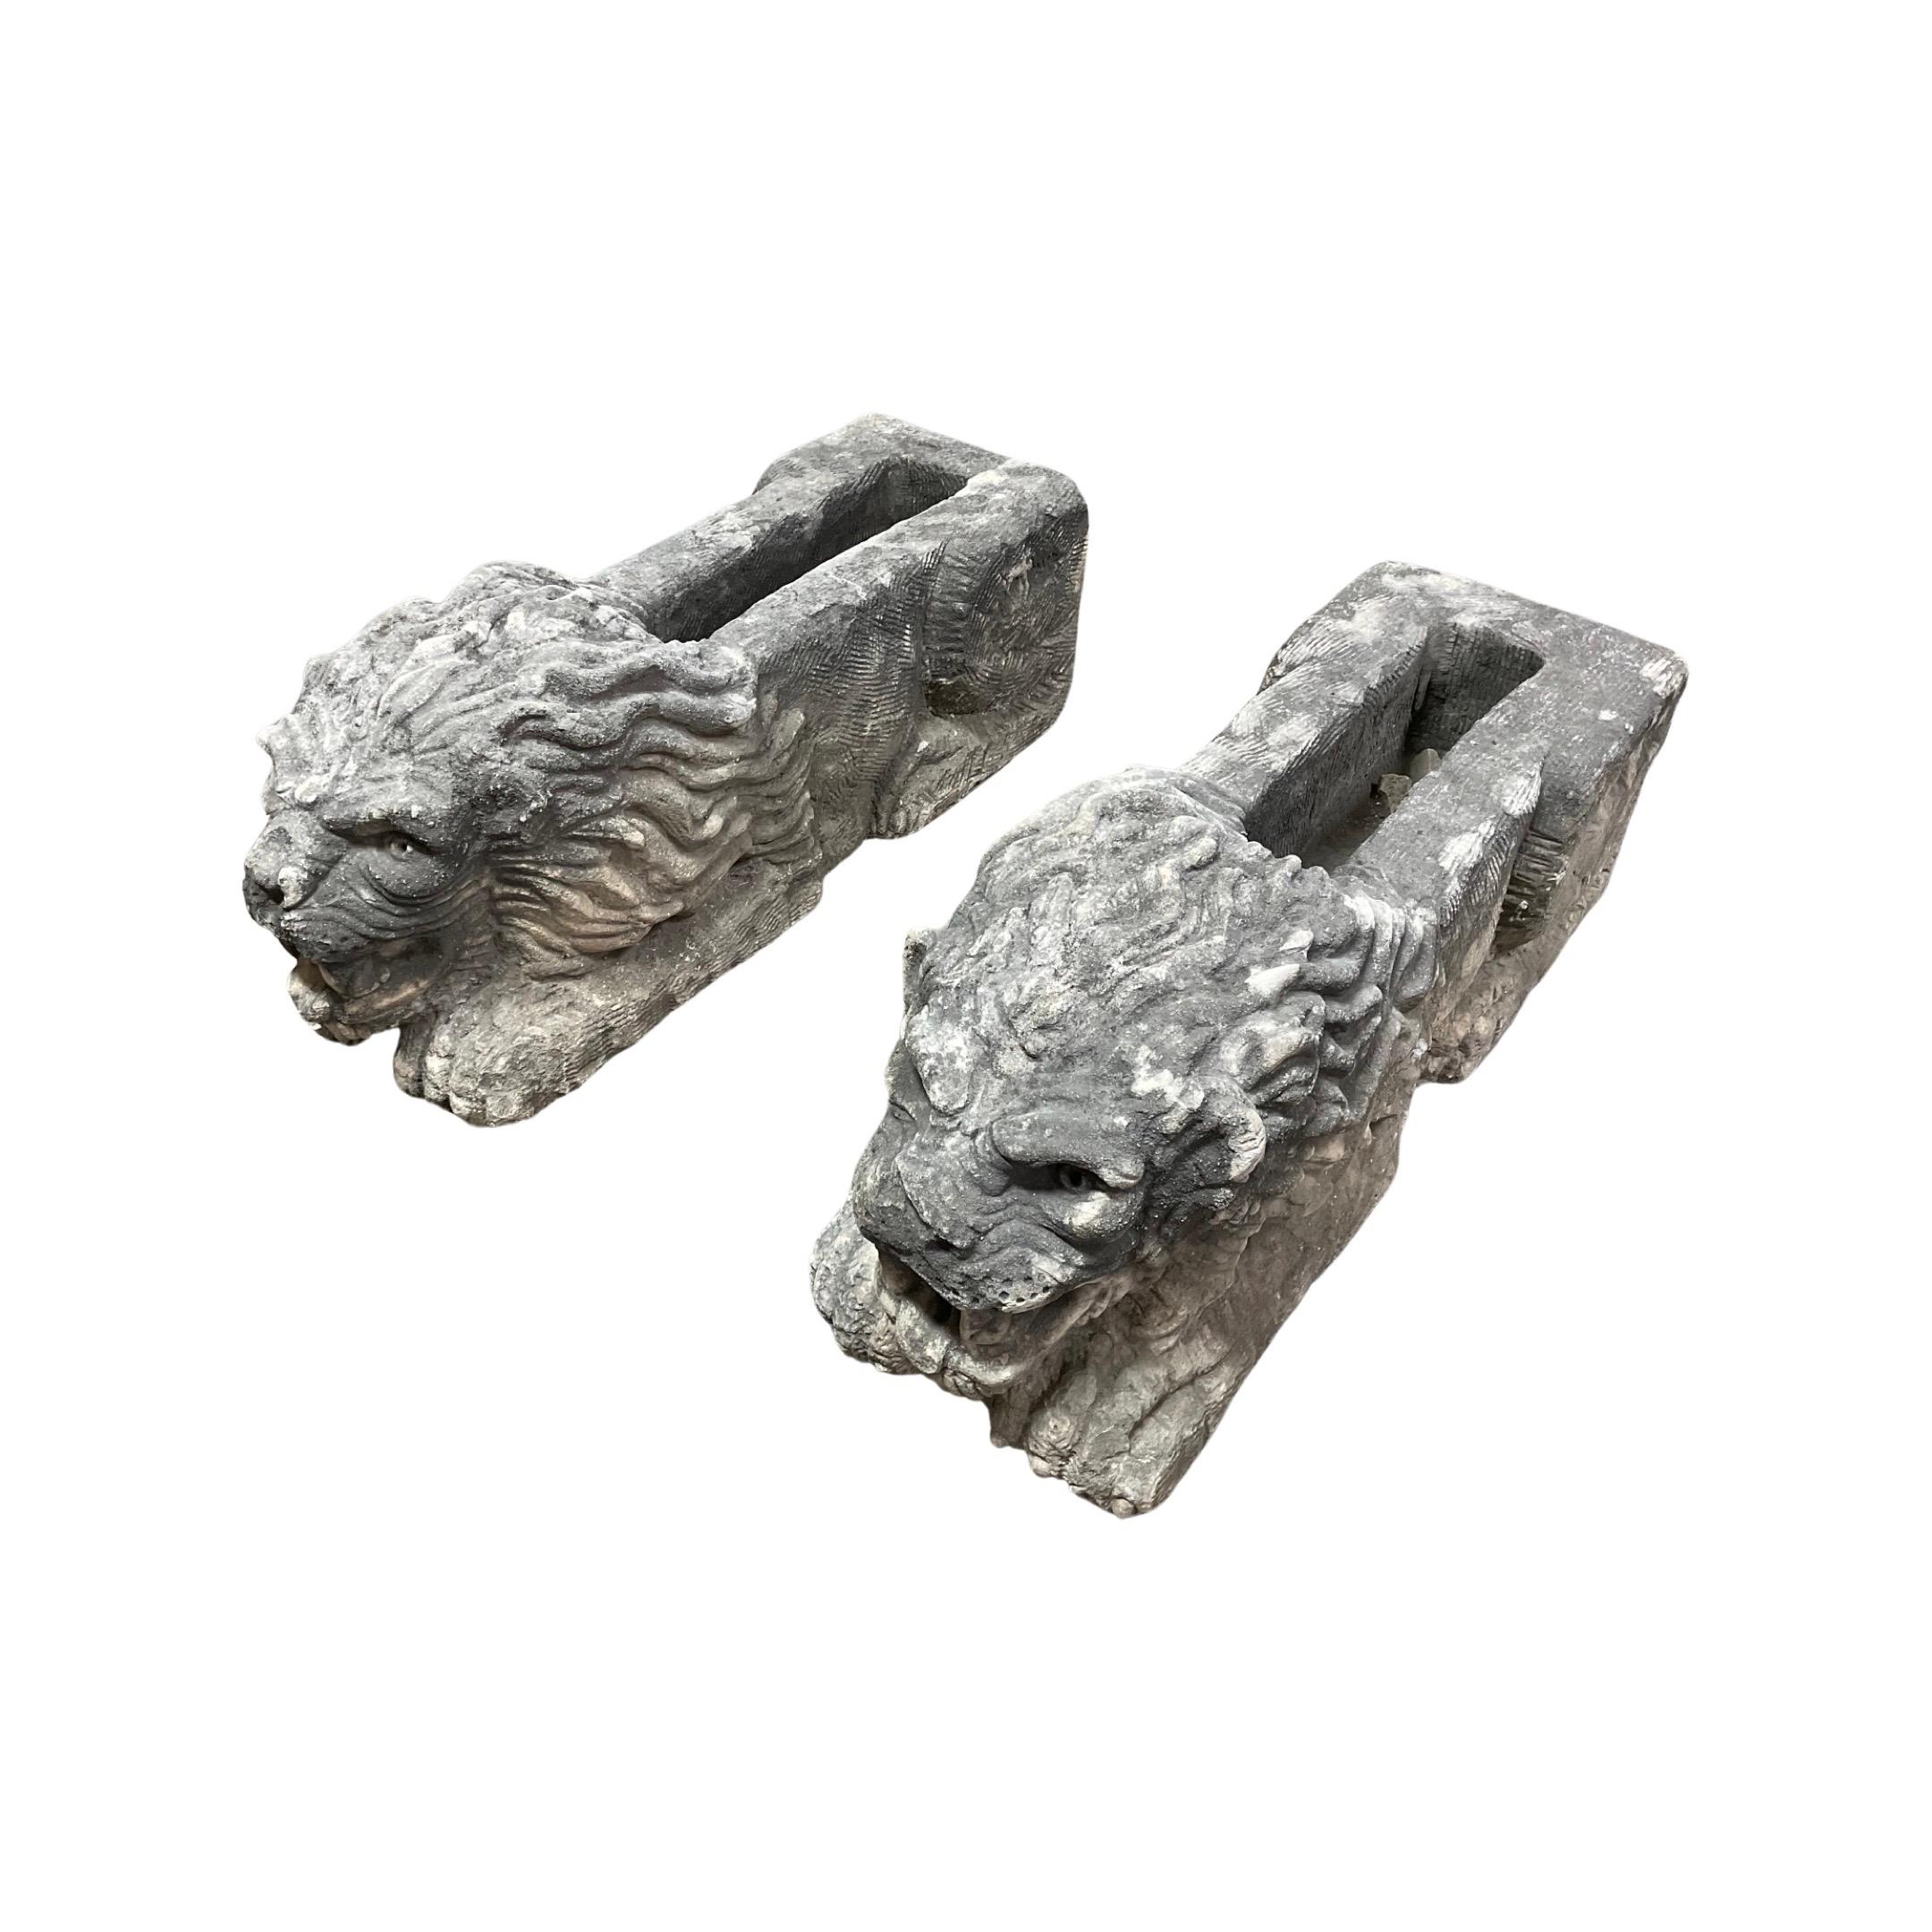 These unique 18th century Lion Carved Downspout Water Exits from France are a stunning addition to any outdoor space. Expertly crafted out of limestone, this pair brings a timeless beauty to your garden or patio. Add a piece of history to your